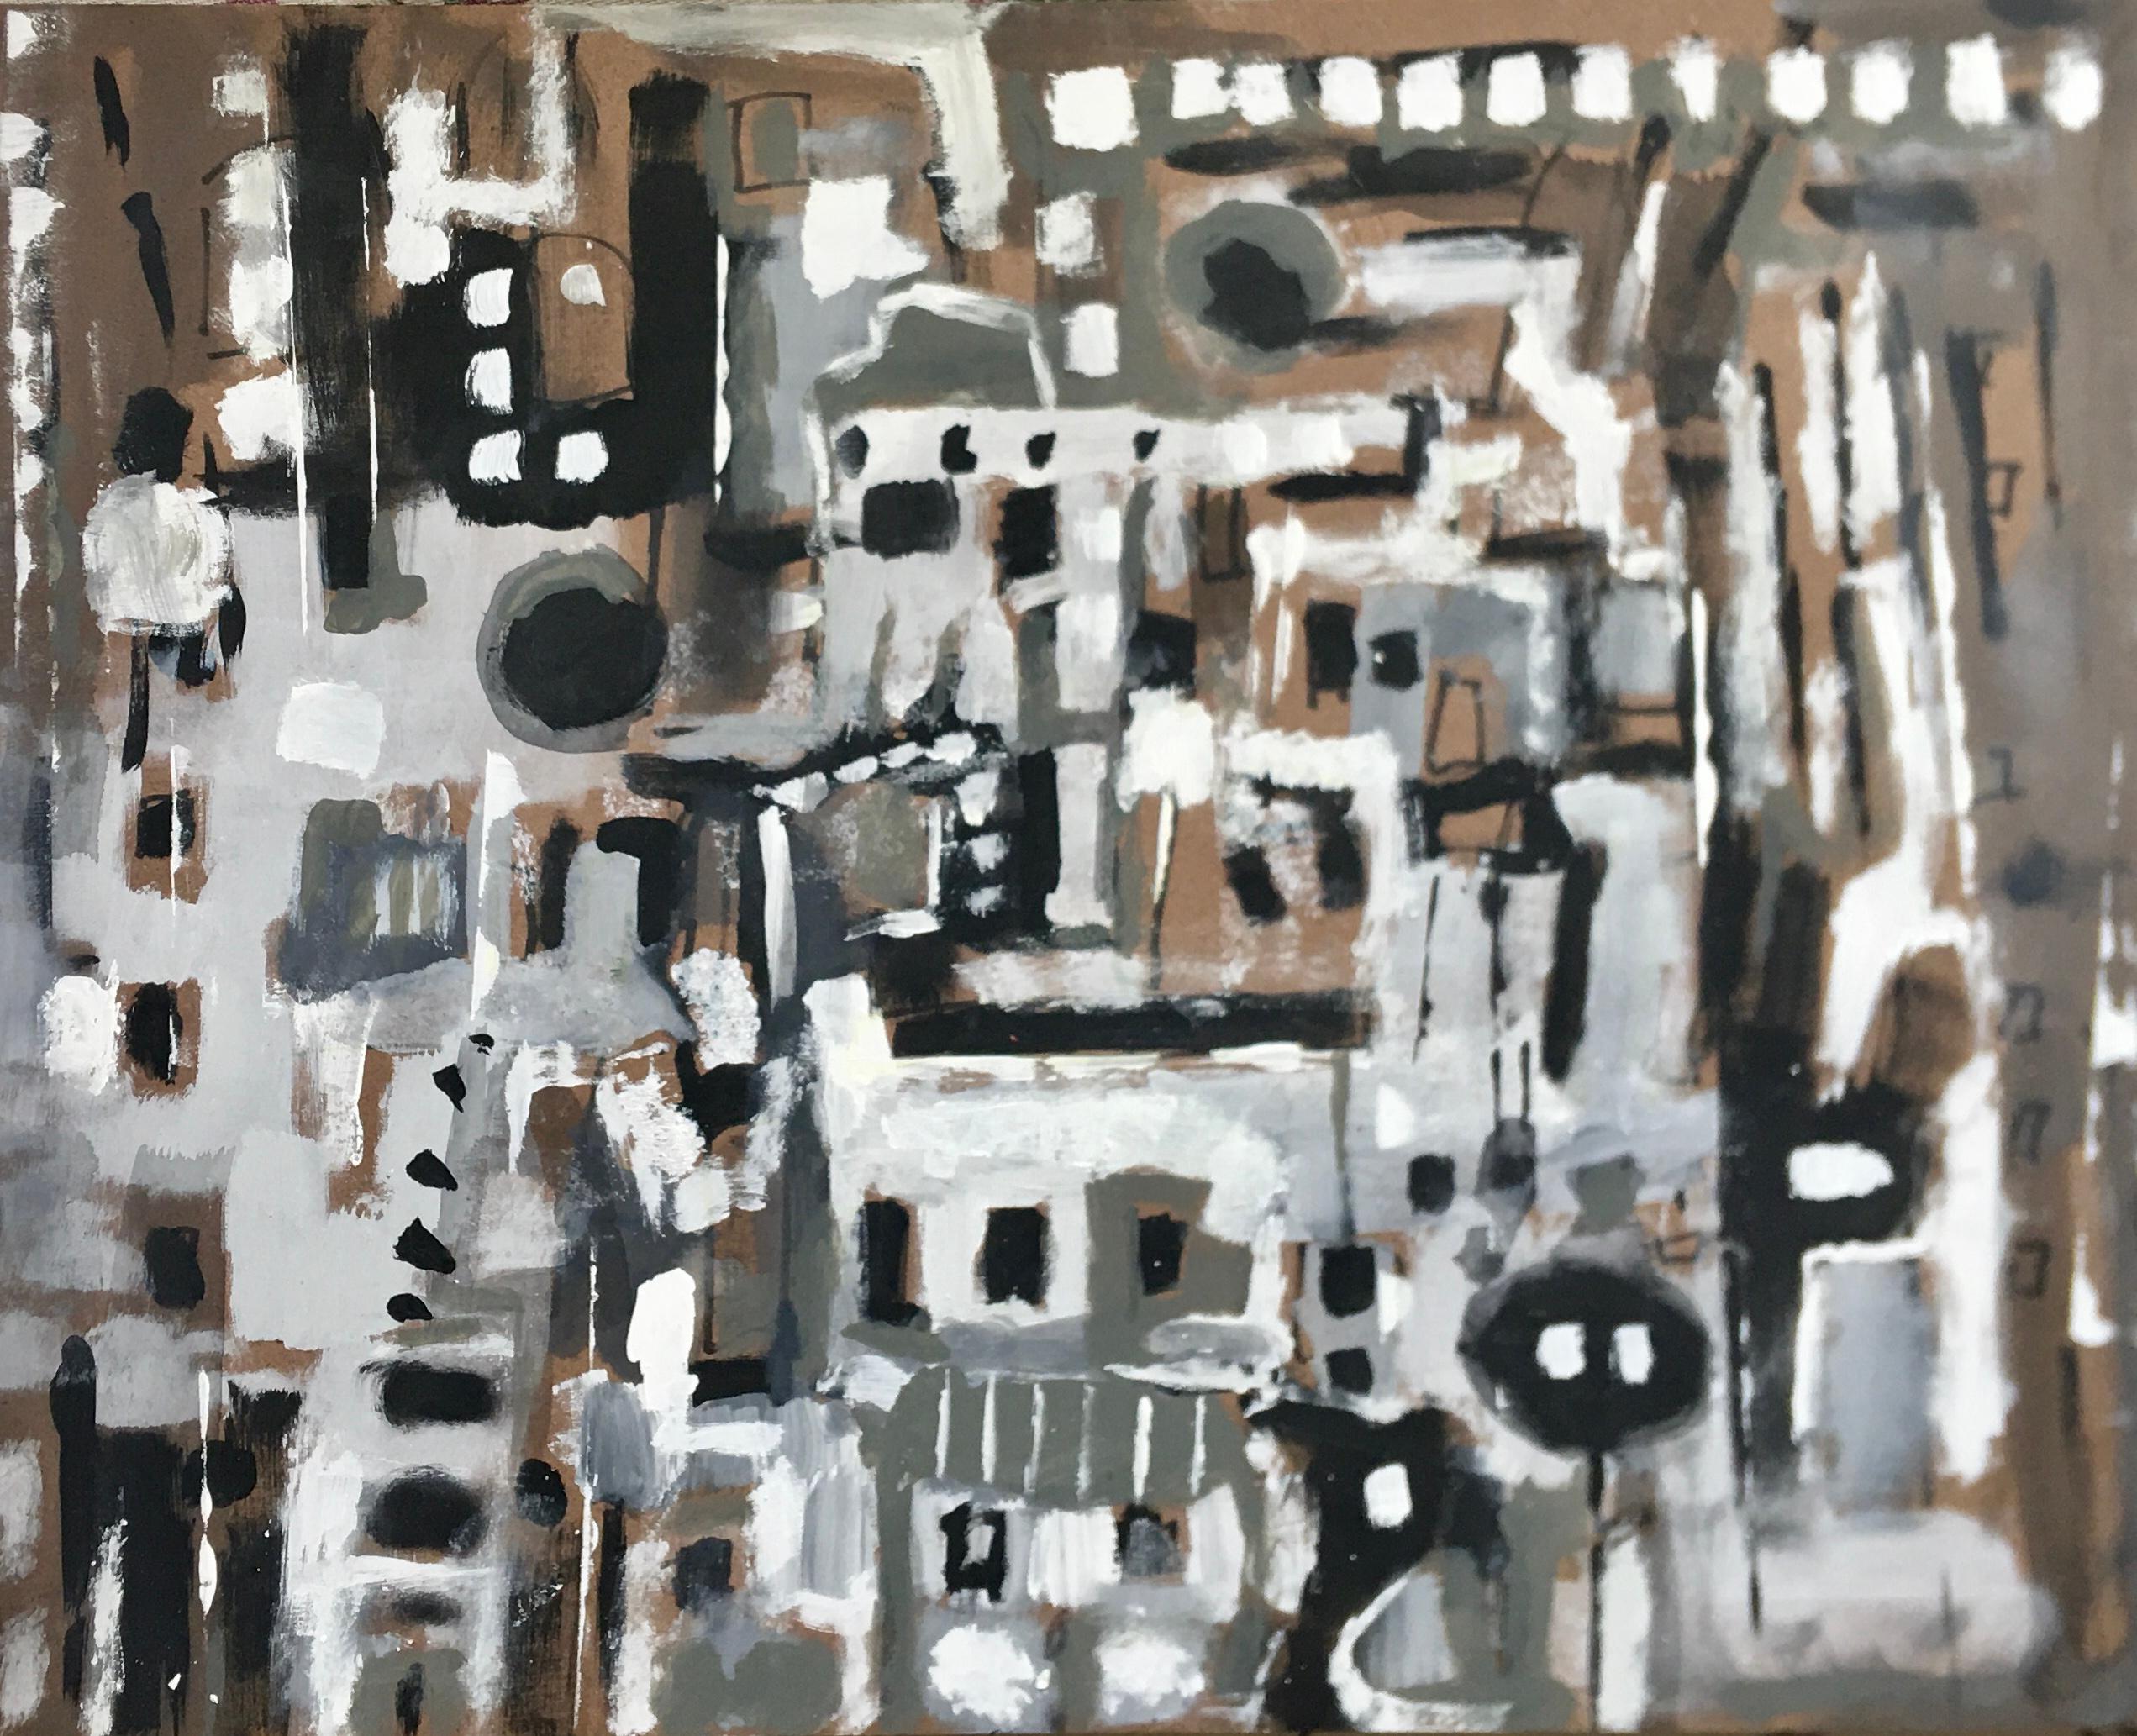 Cubist Jardin, Original Abstract Painting, 2021
Acrylic on panel
14"W x 11"H 
2021

Words that describe this piece: black and white, abstract, cubism, painting, original, picasso, braque, dali

Artist Commentary:
All my paintings are simply the